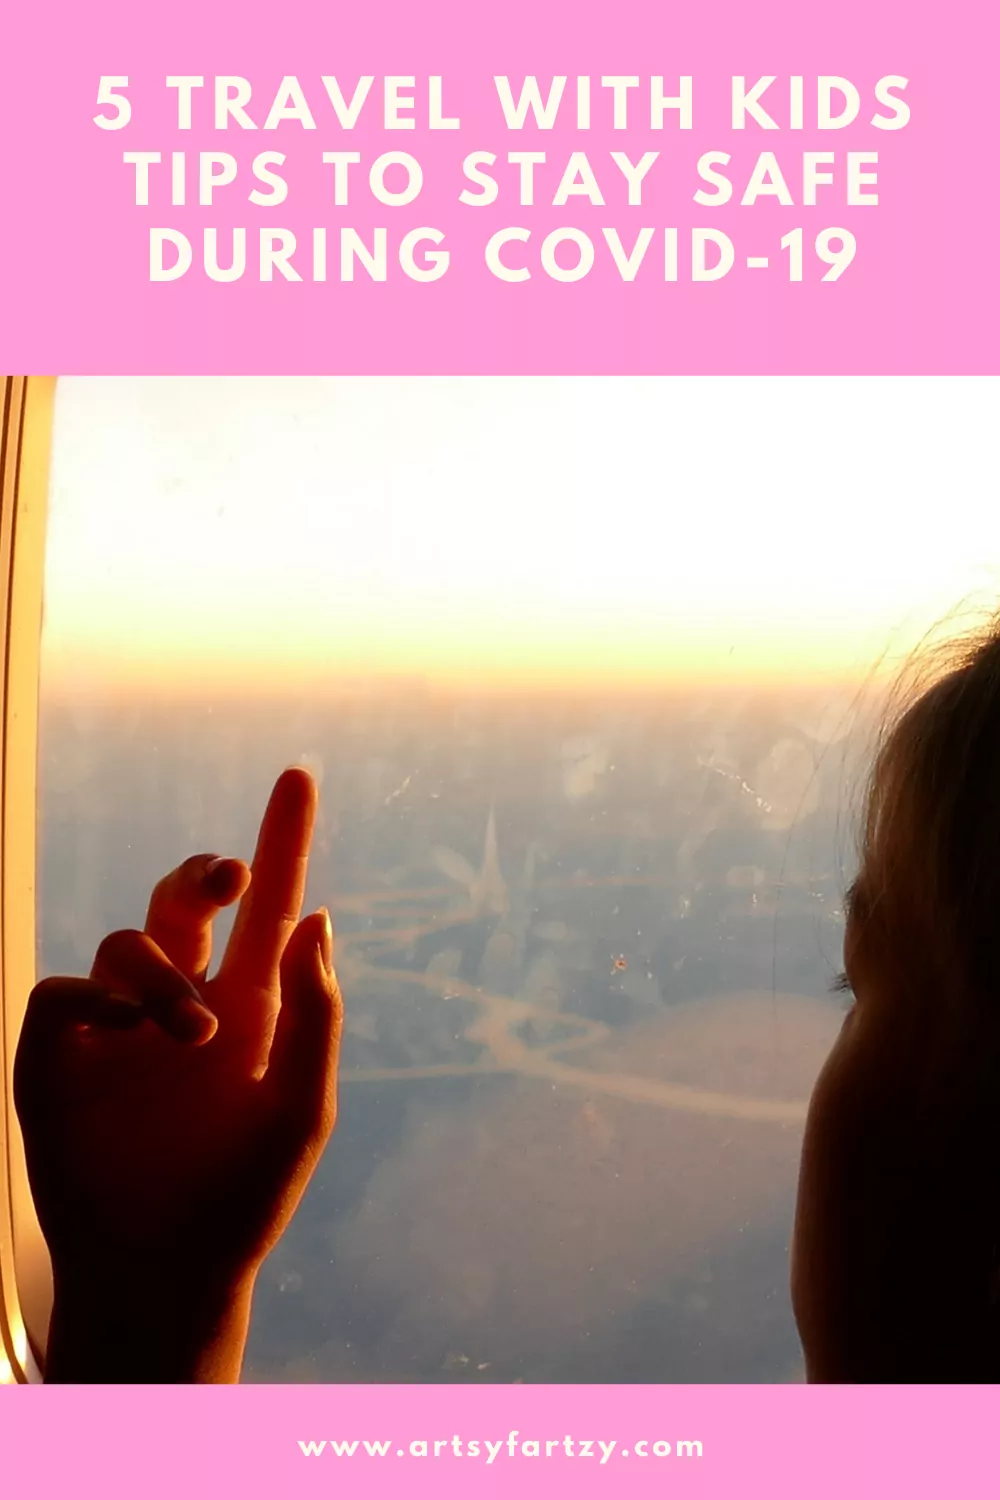 5 Travel with Kids Tips to stay safe during COVID-19 on The ArtsyFartzy Experience Blog